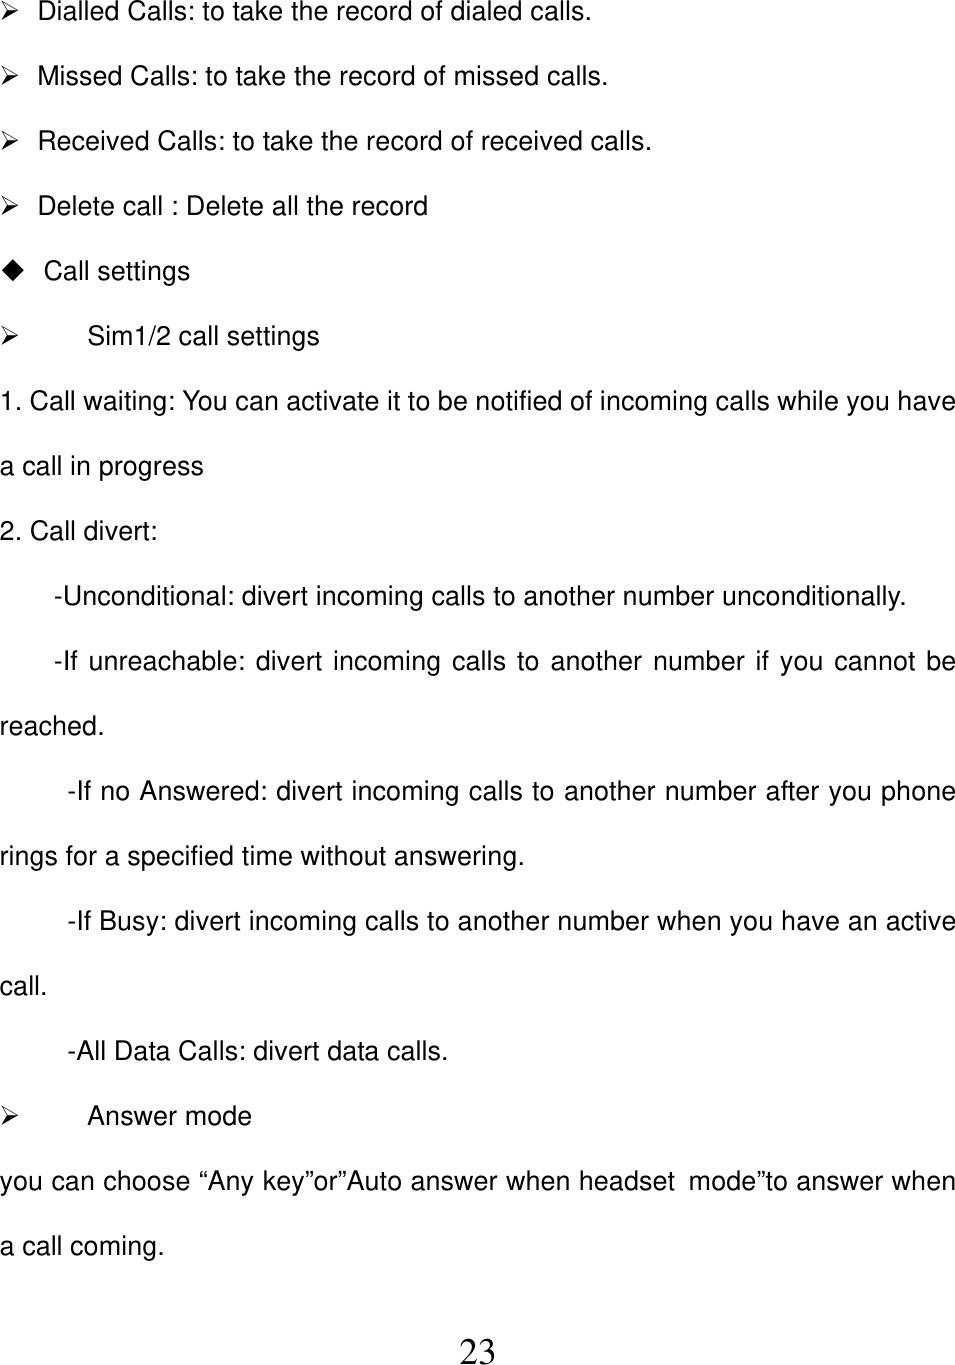  23  Dialled Calls: to take the record of dialed calls.   Missed Calls: to take the record of missed calls.   Received Calls: to take the record of received calls.   Delete call : Delete all the record  Call settings   Sim1/2 call settings 1. Call waiting: You can activate it to be notified of incoming calls while you have a call in progress 2. Call divert:   -Unconditional: divert incoming calls to another number unconditionally. -If unreachable: divert incoming calls to another number if you cannot be reached. -If no Answered: divert incoming calls to another number after you phone rings for a specified time without answering. -If Busy: divert incoming calls to another number when you have an active call. -All Data Calls: divert data calls.  Answer mode you can choose “Any key”or”Auto answer when headset mode”to answer when a call coming.  